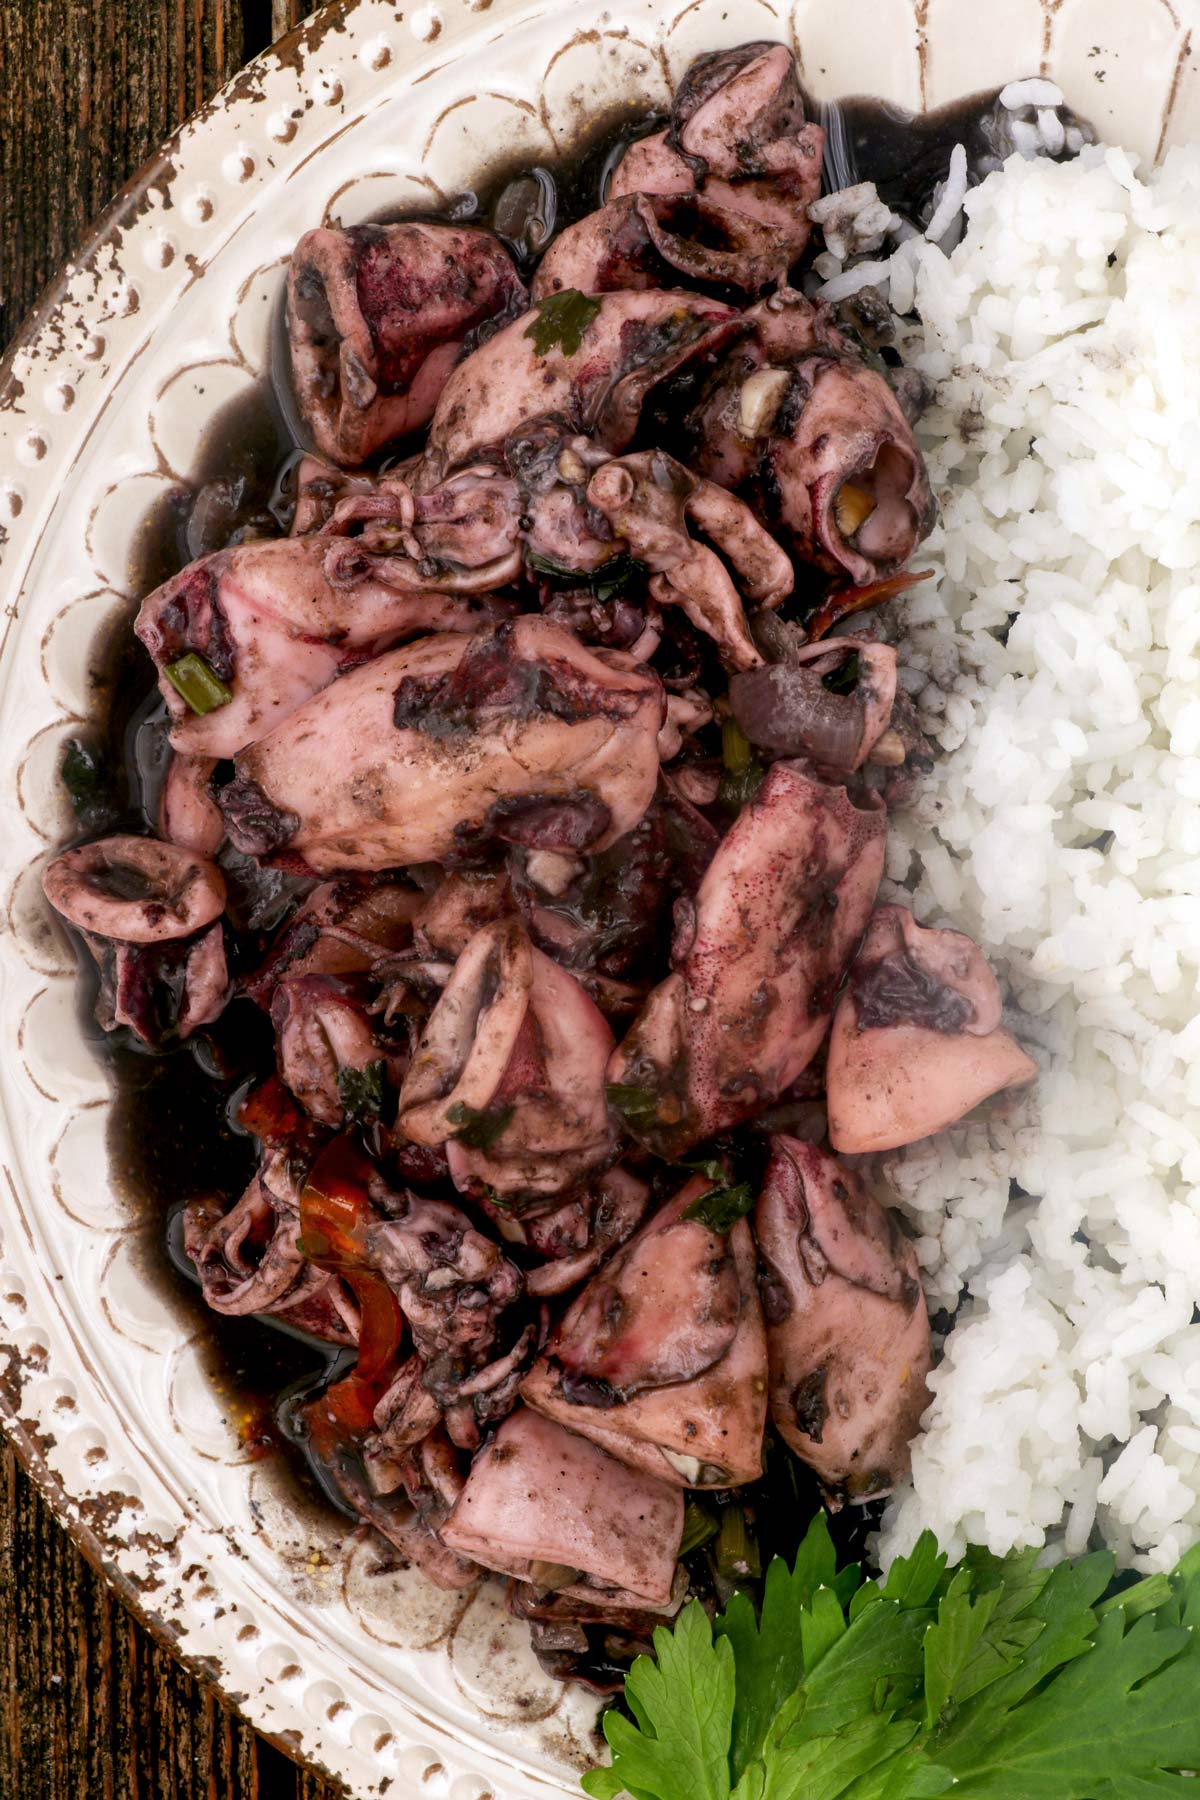 Abobong pusit in a plate served with steamed white rice.